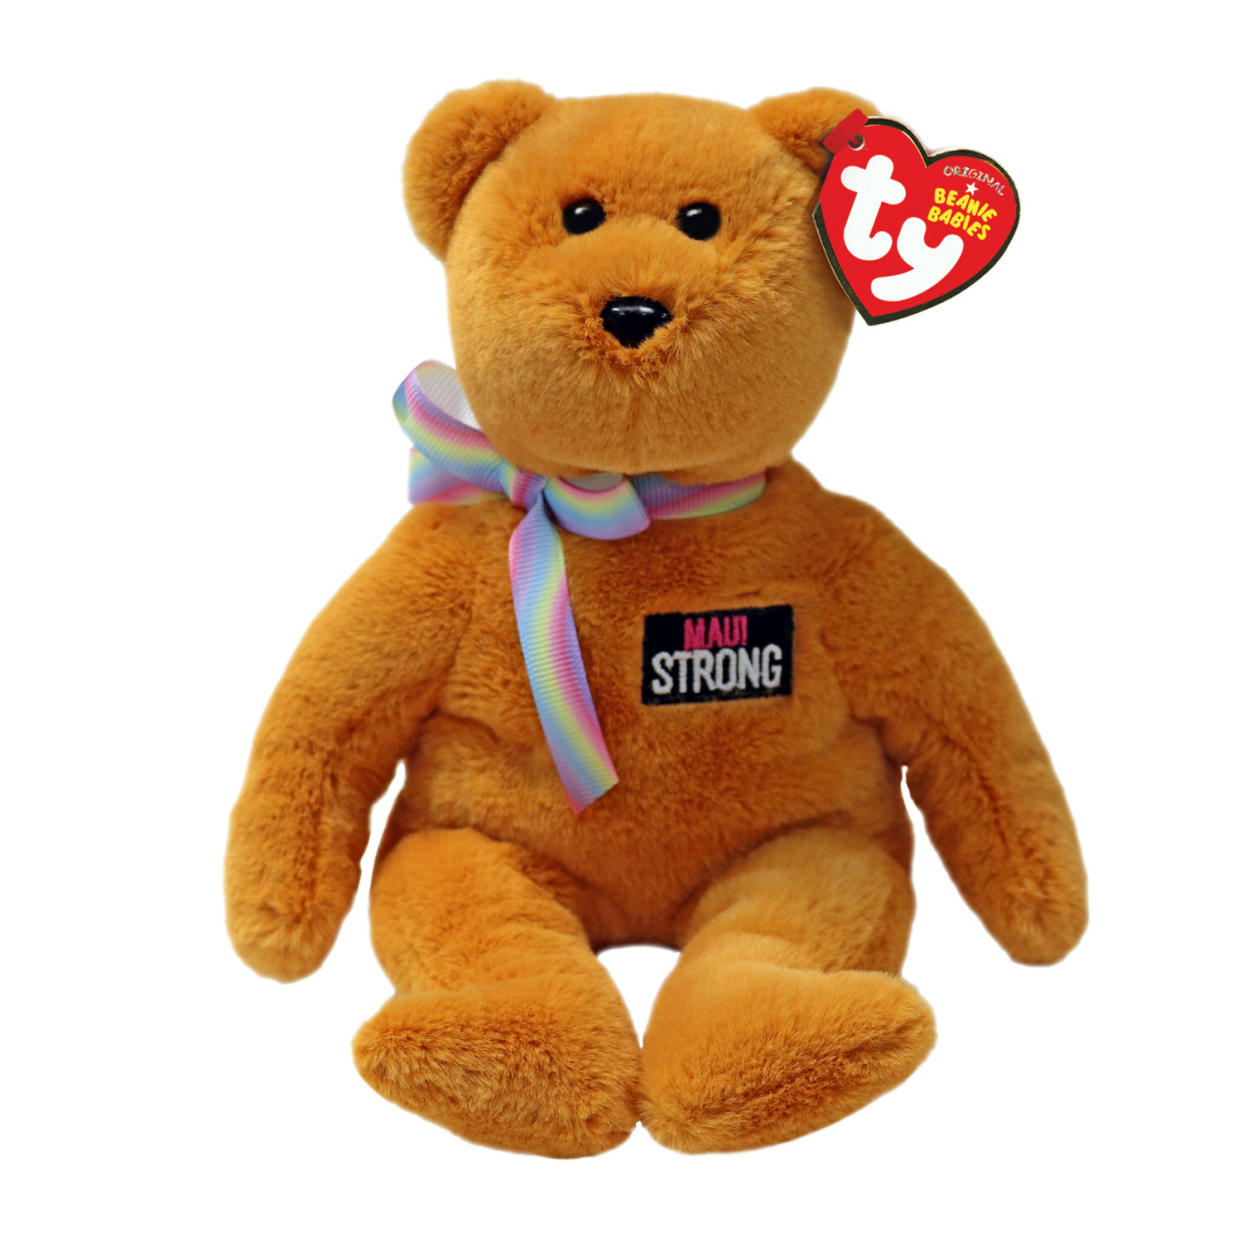 All profits from the limited-edition Beanie Baby will be donated to the American Red Cross to help people affected by the Hawaii wildfires. (Ty Inc.)